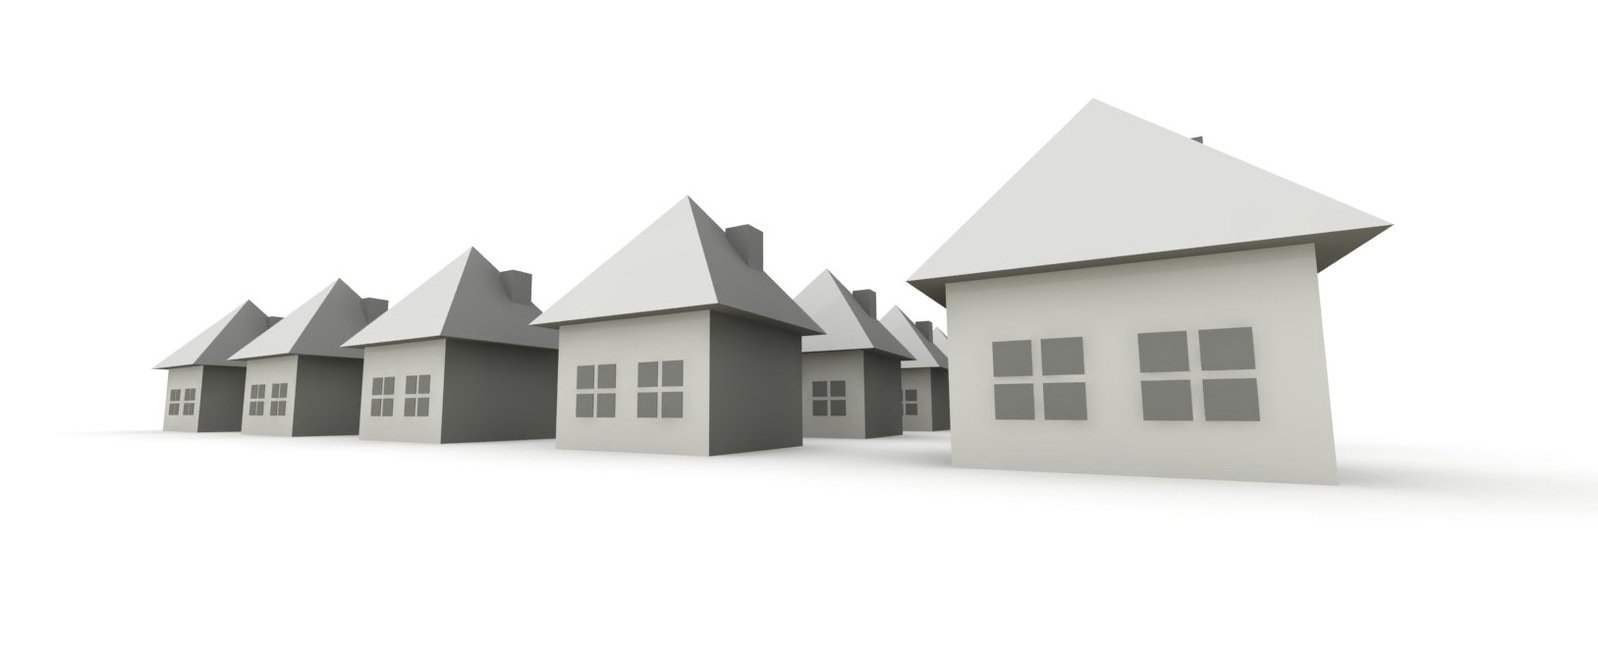 3d model houses with a white background